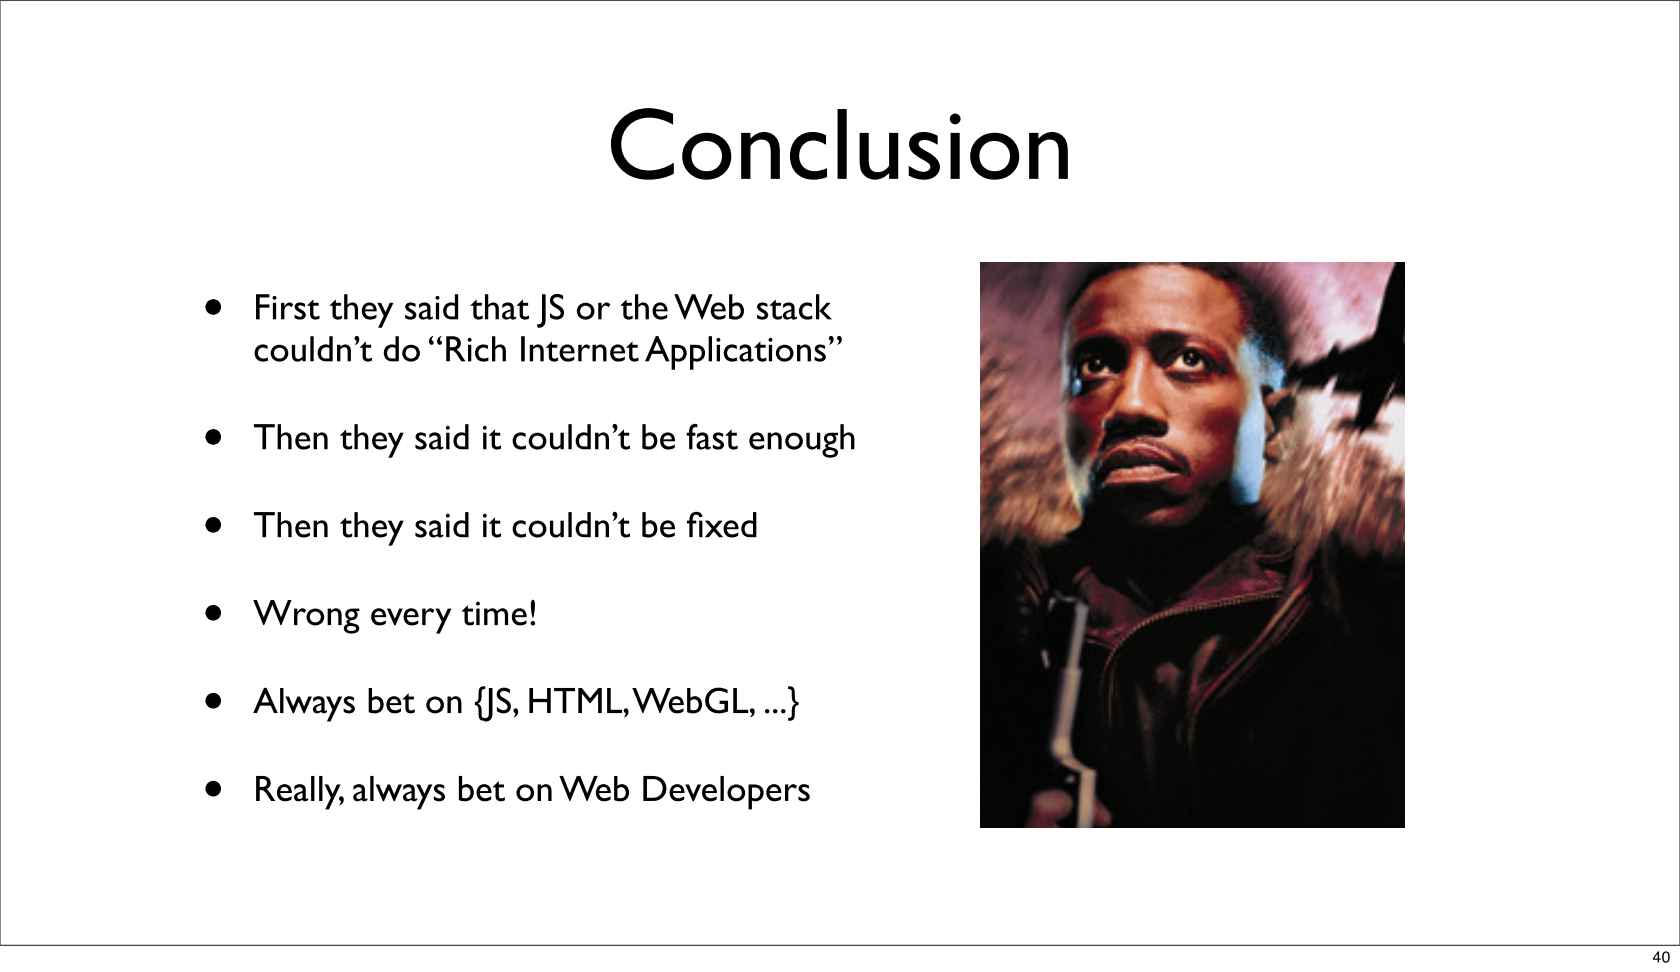 Last slide with the conclusion of the present and future of the web platform talk